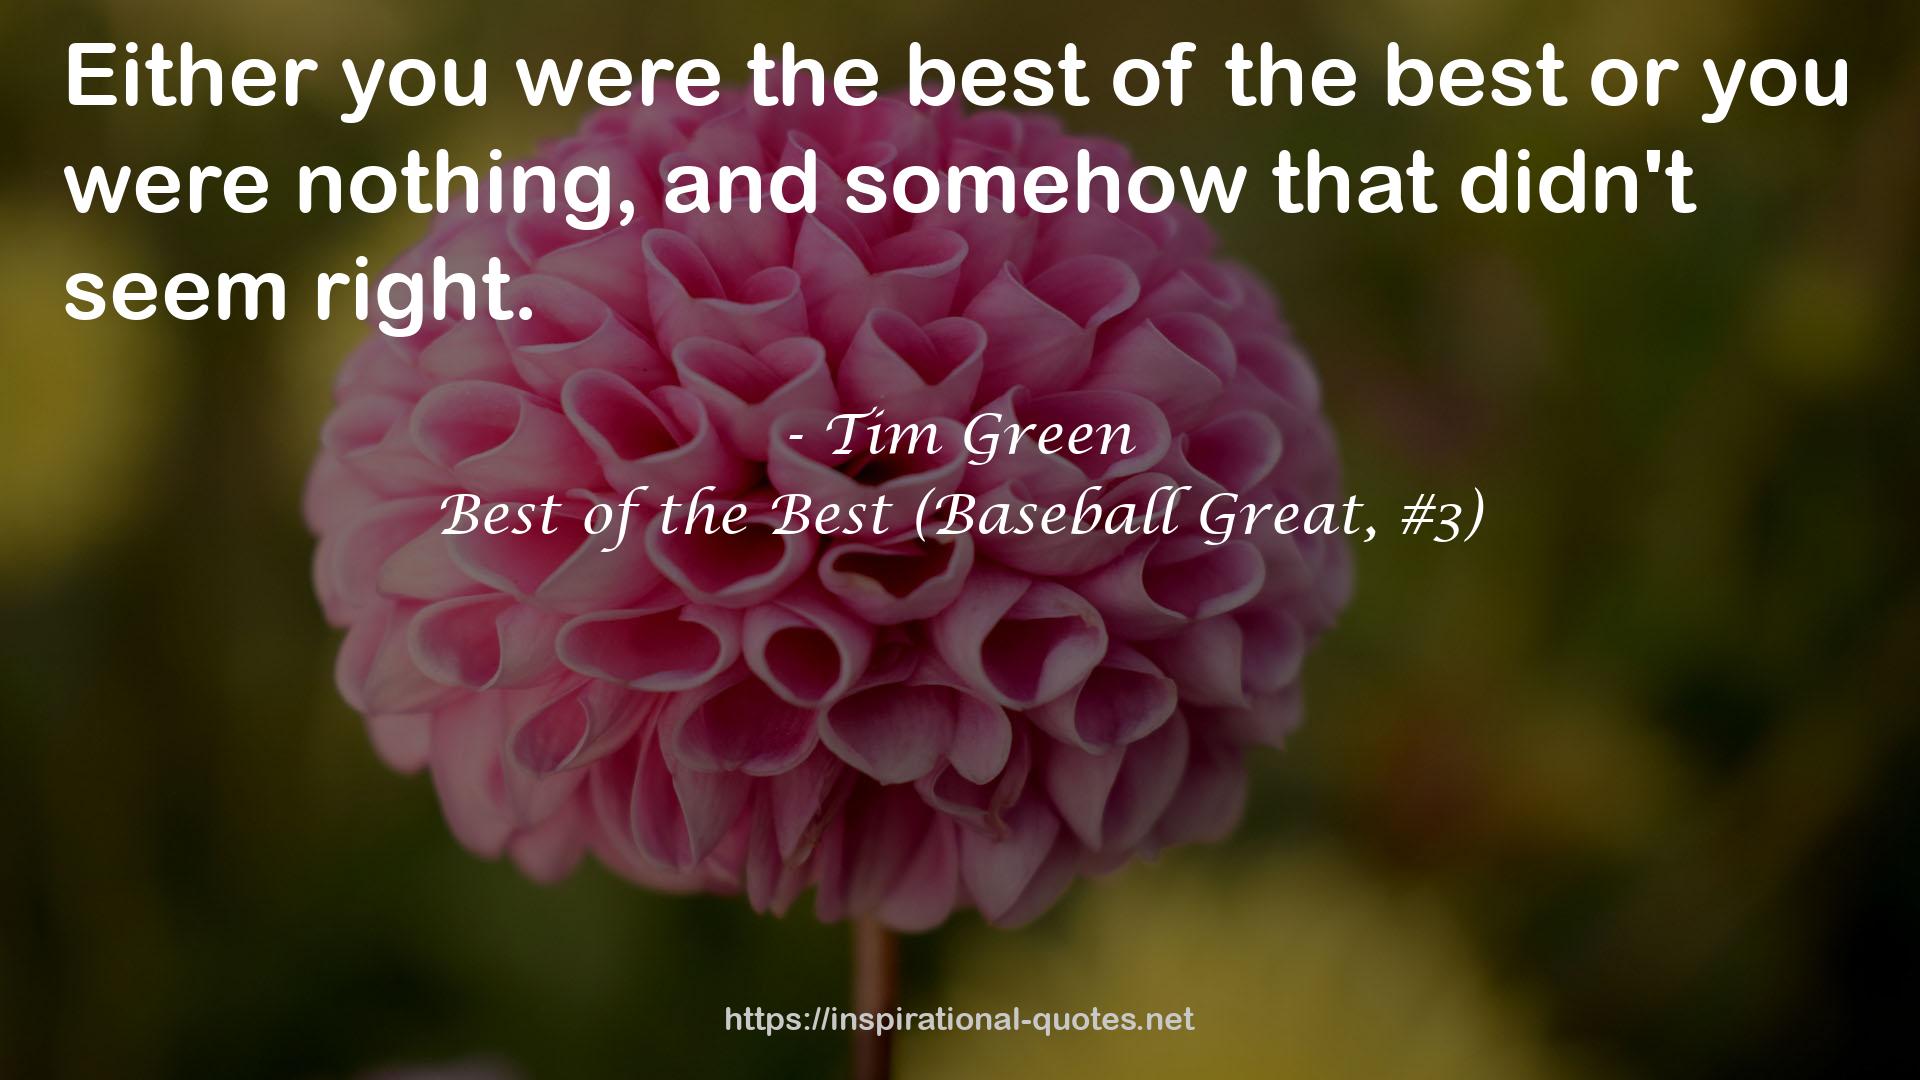 Best of the Best (Baseball Great, #3) QUOTES